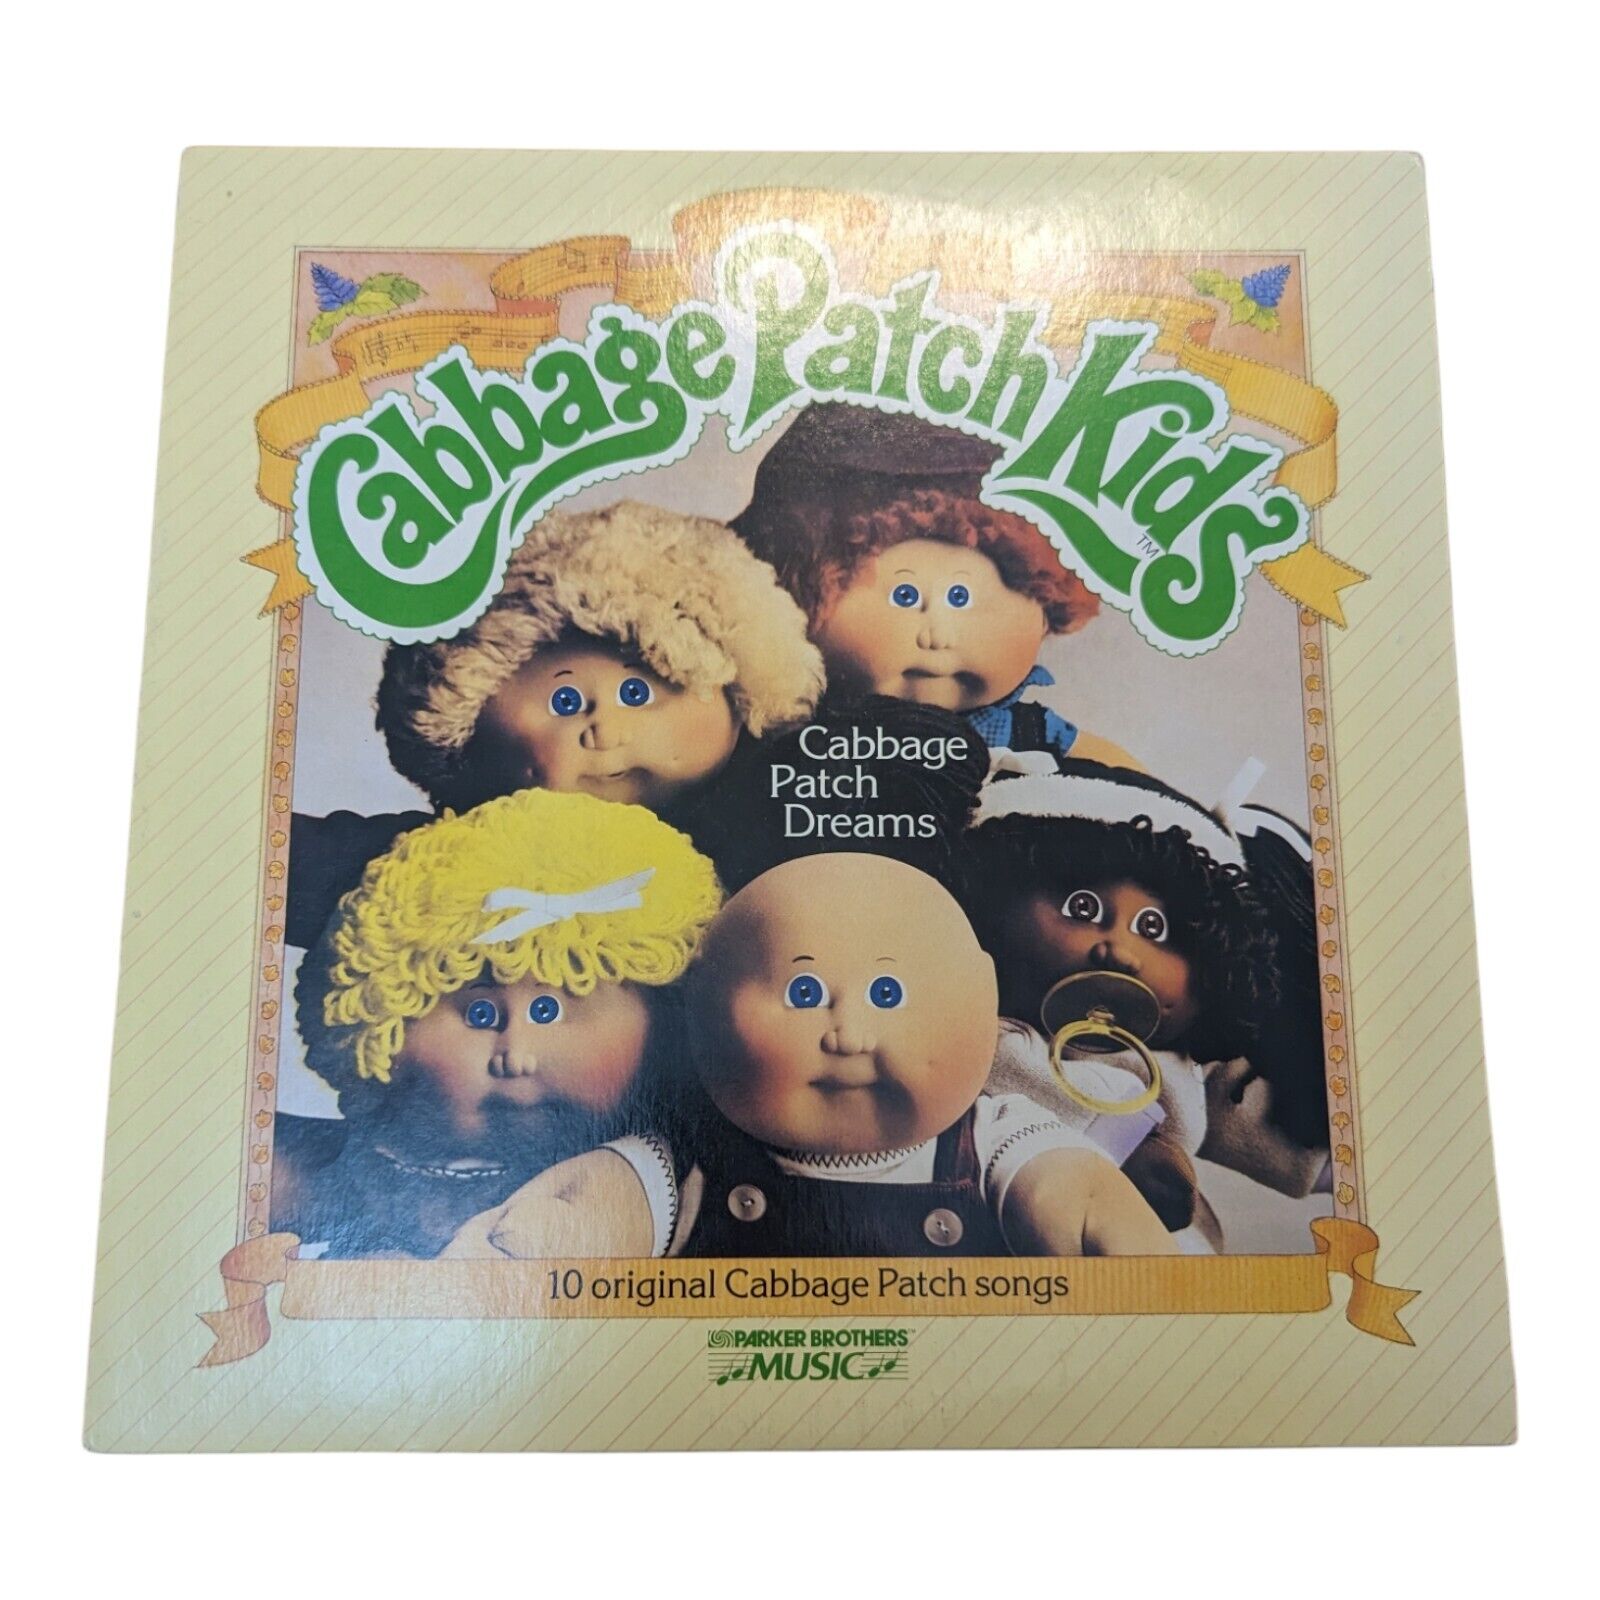 Cabbage Patch Kids . Cabbage Patch Dreams  Parker Brothers Record LP